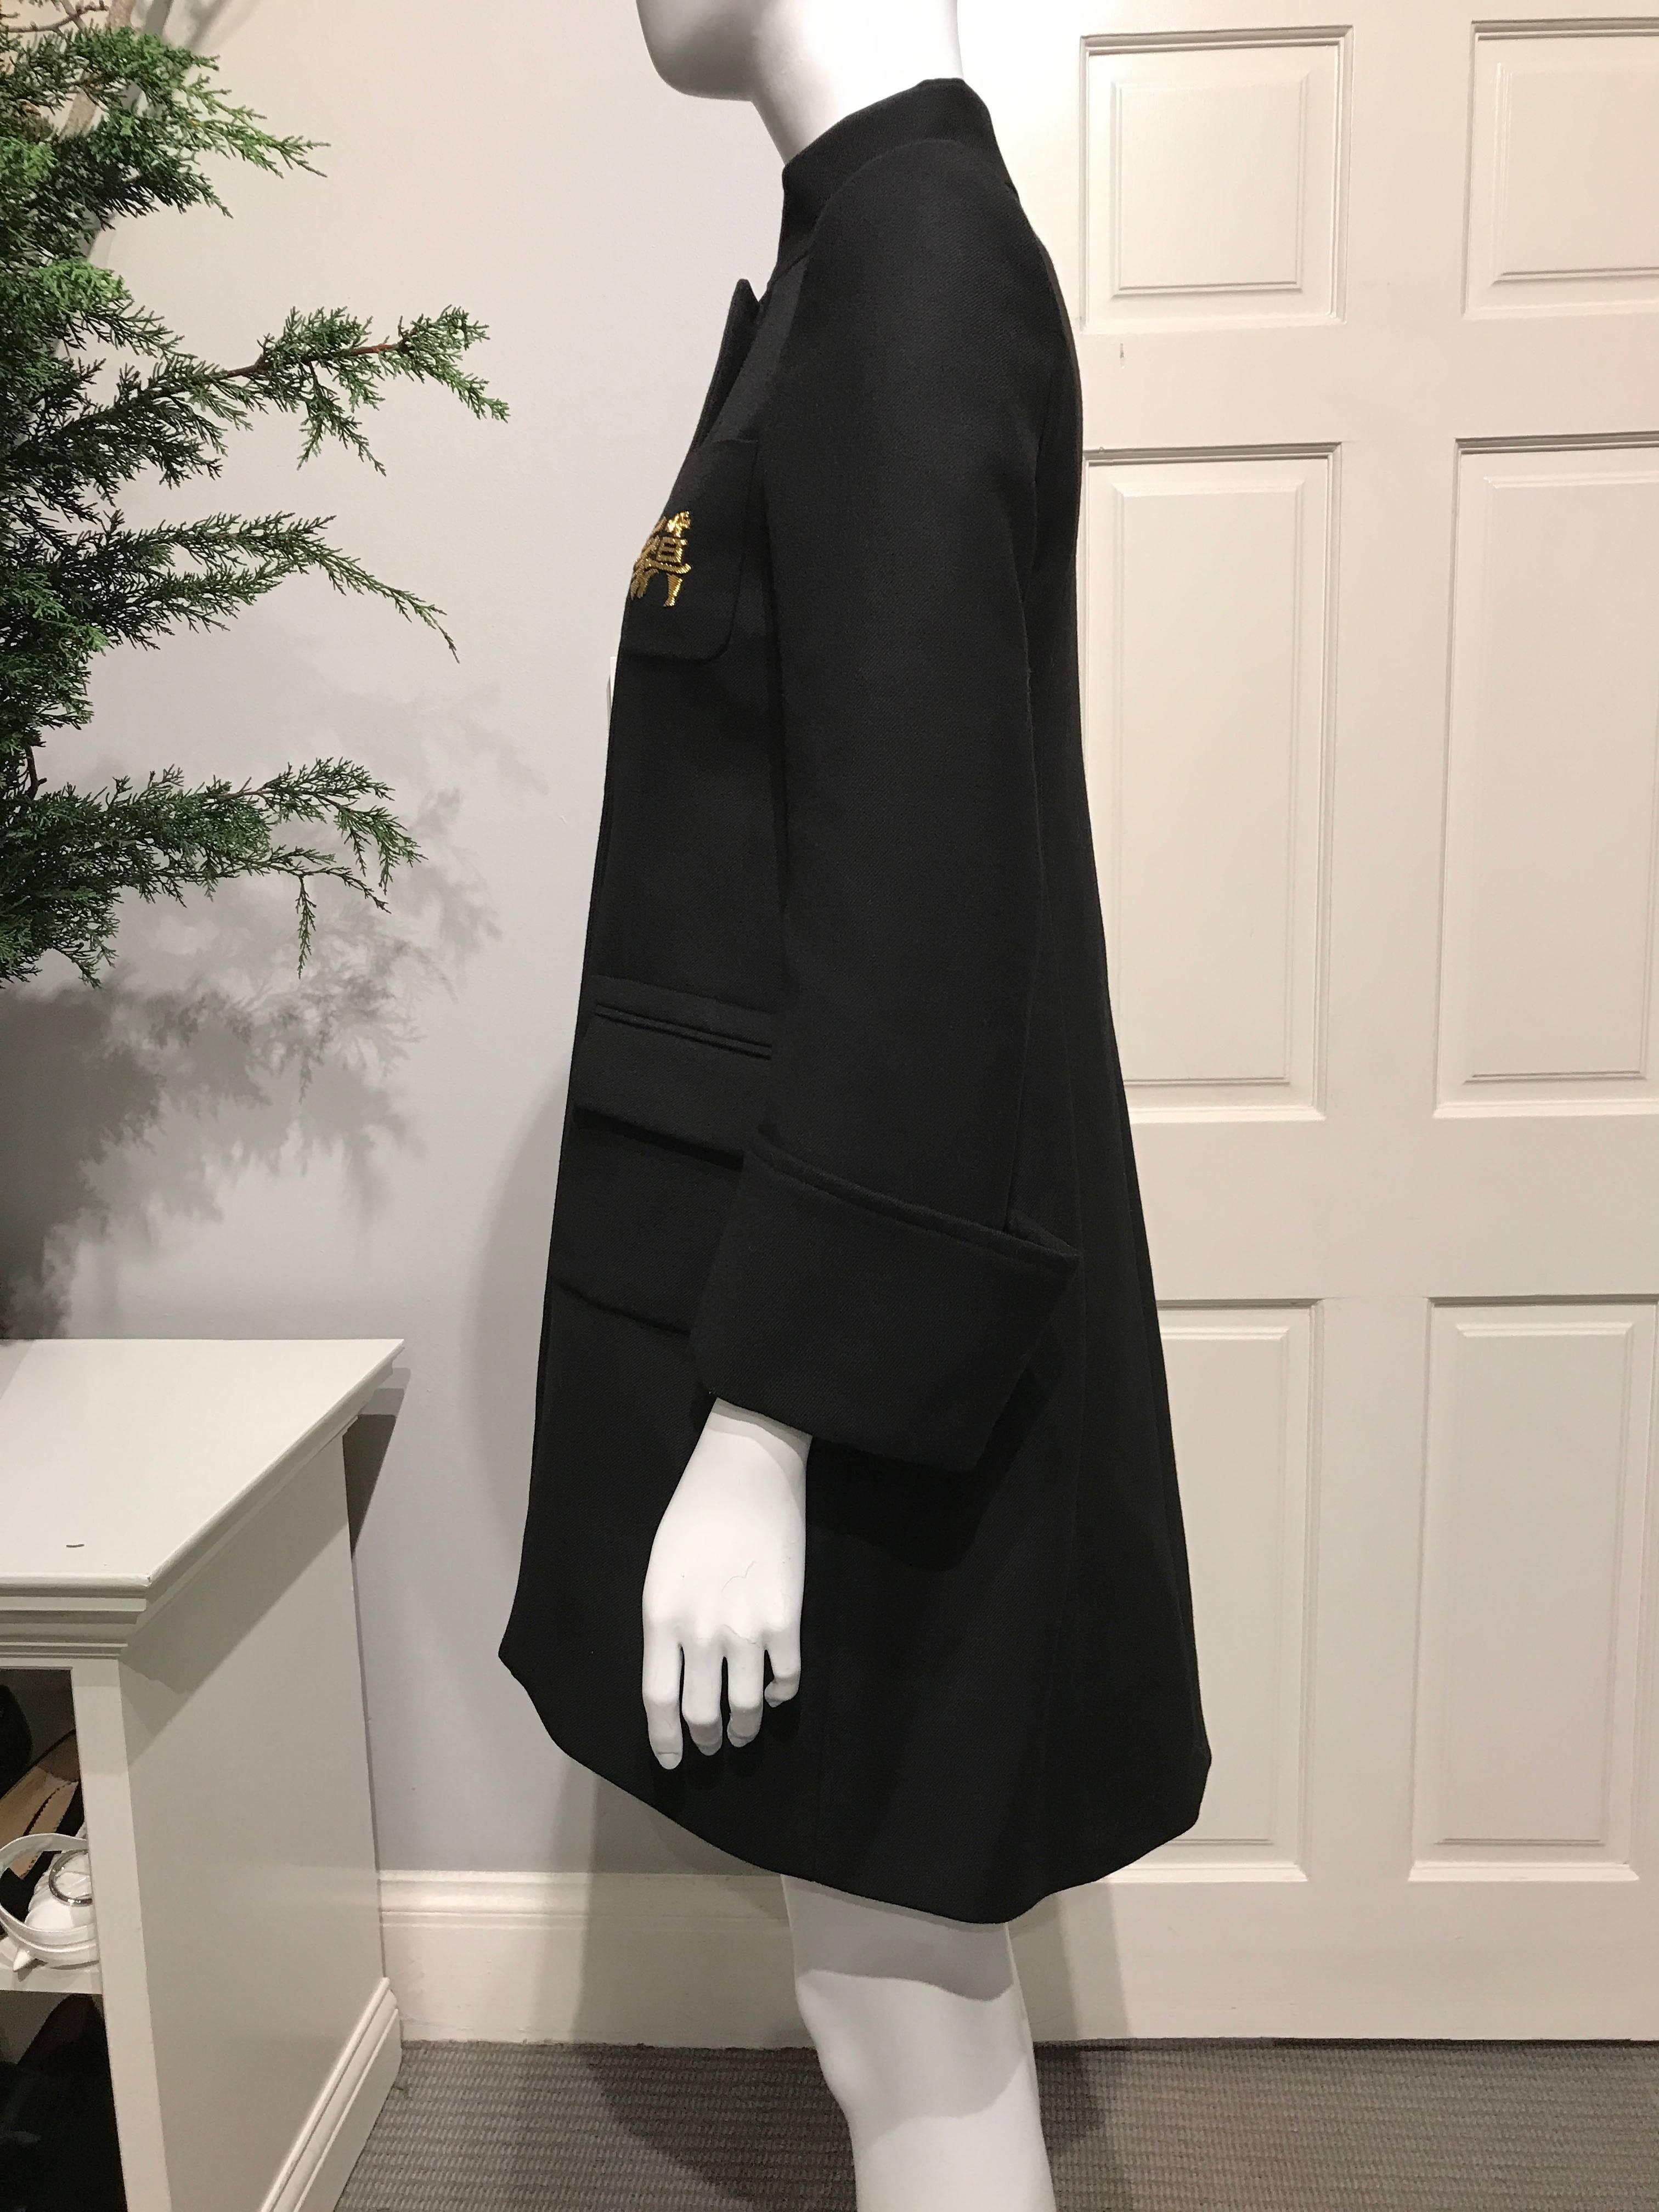 Balenciaga Black Coat With Asian Letters On Breast Pocket In New Condition For Sale In San Francisco, CA